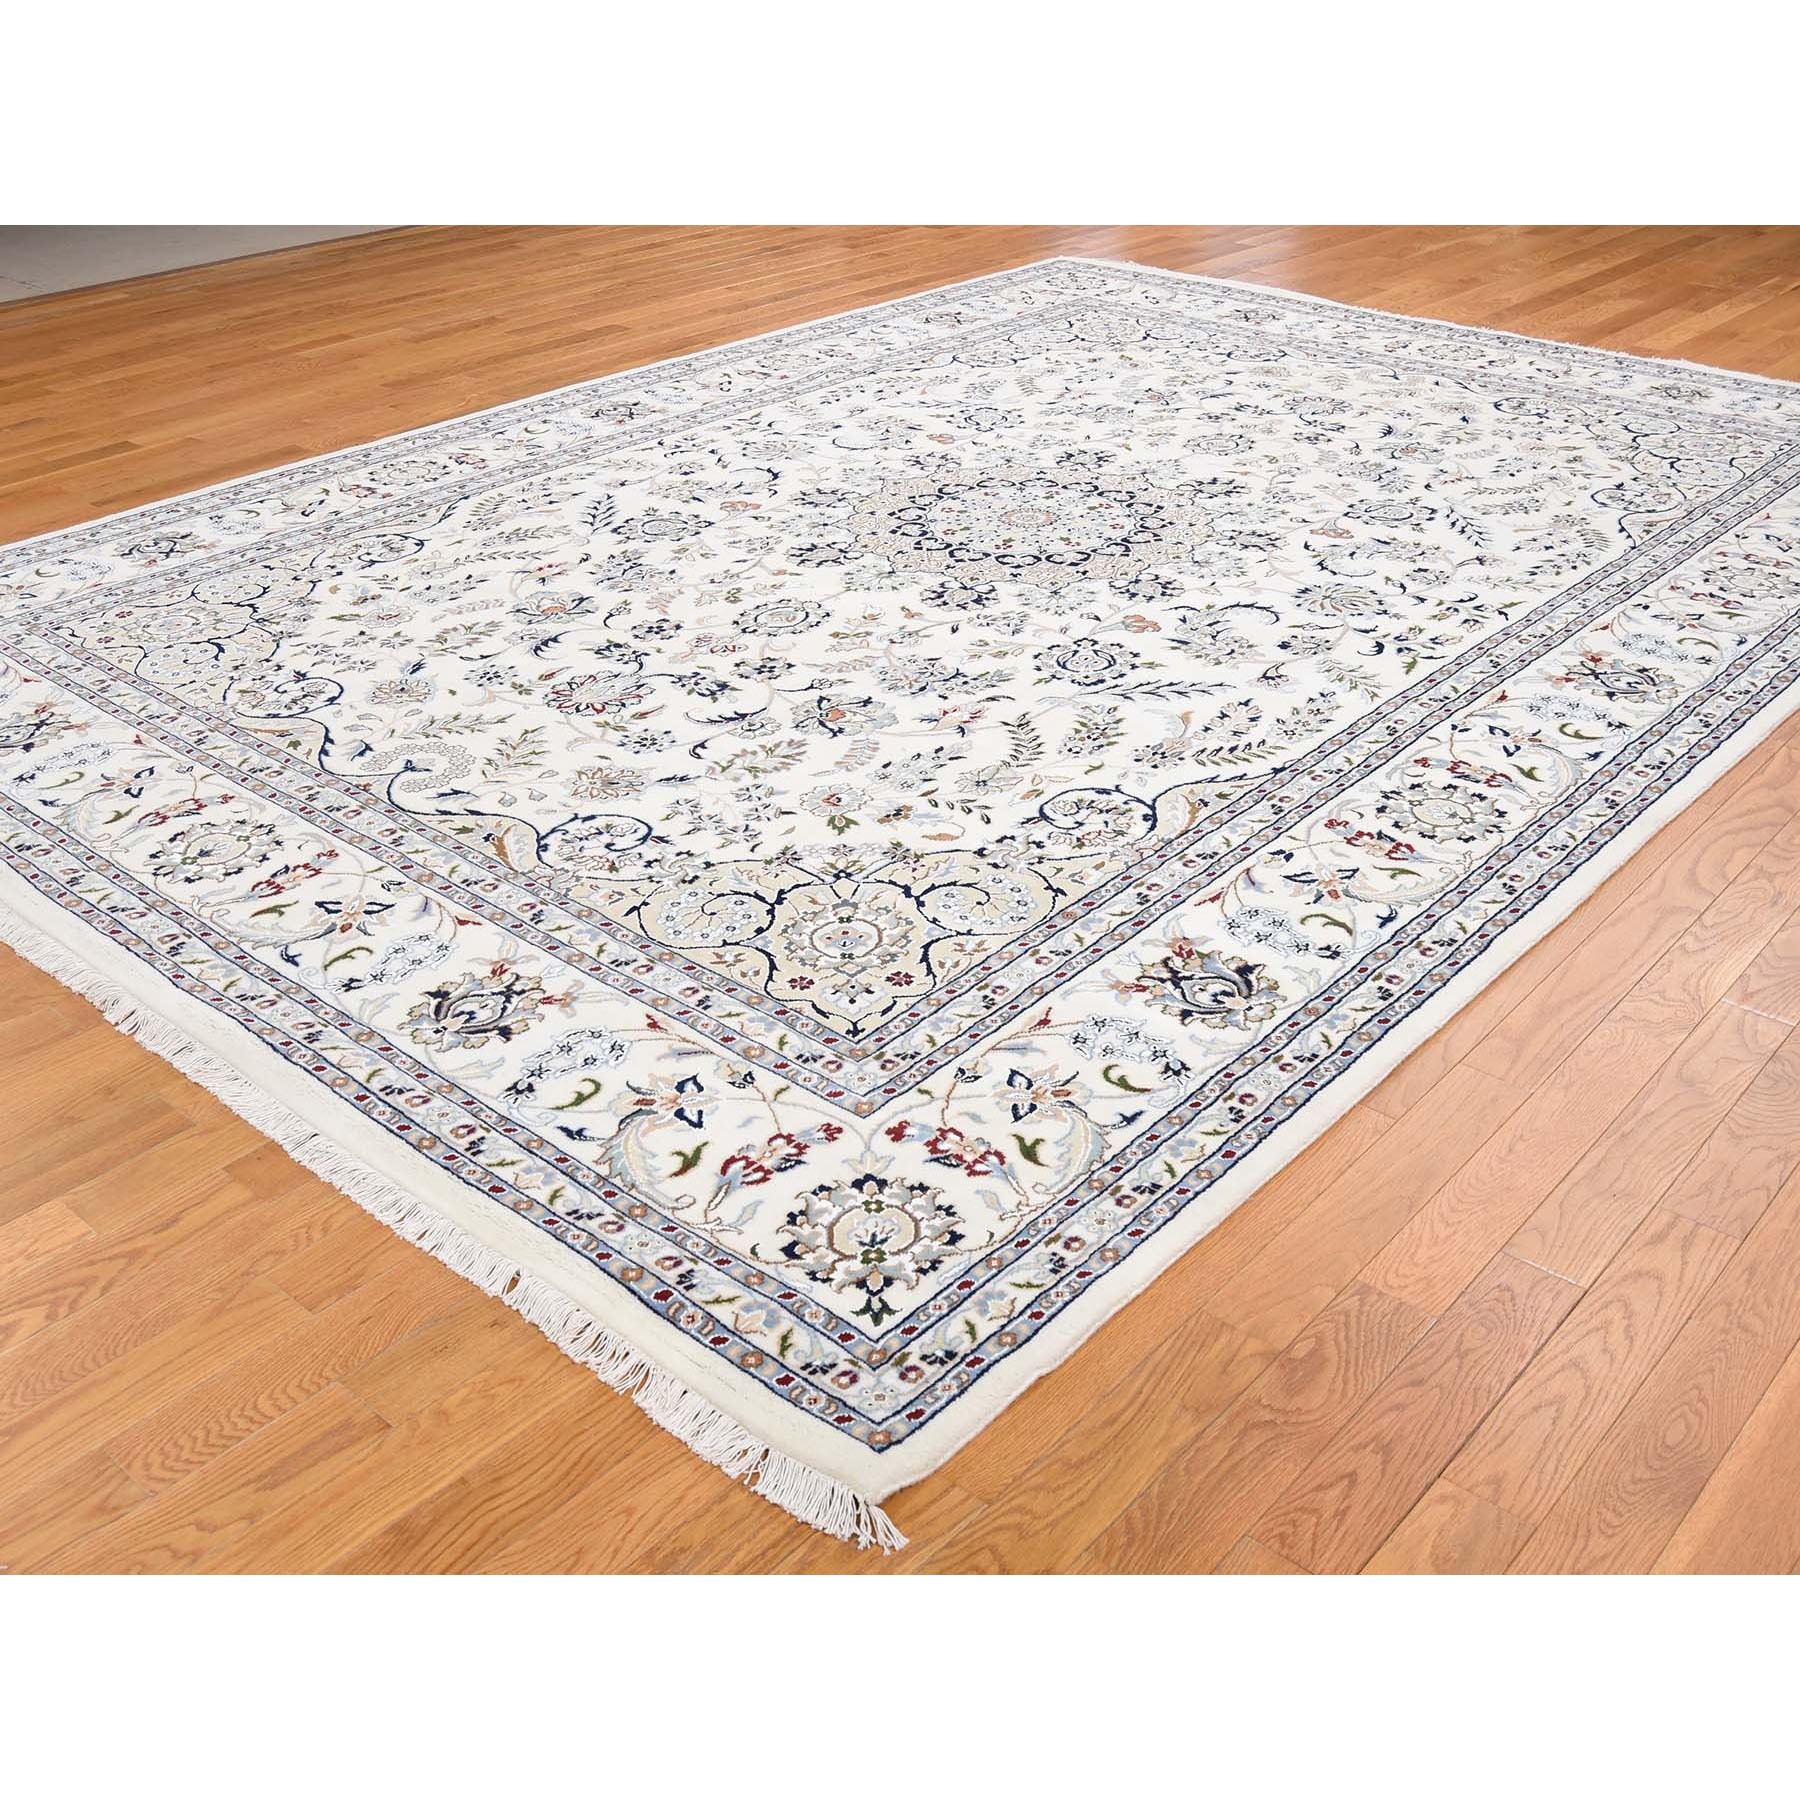 9-1 x12-1  Wool And Silk 250 KPSI Ivory Nain Hand Knotted Oriental Rug 